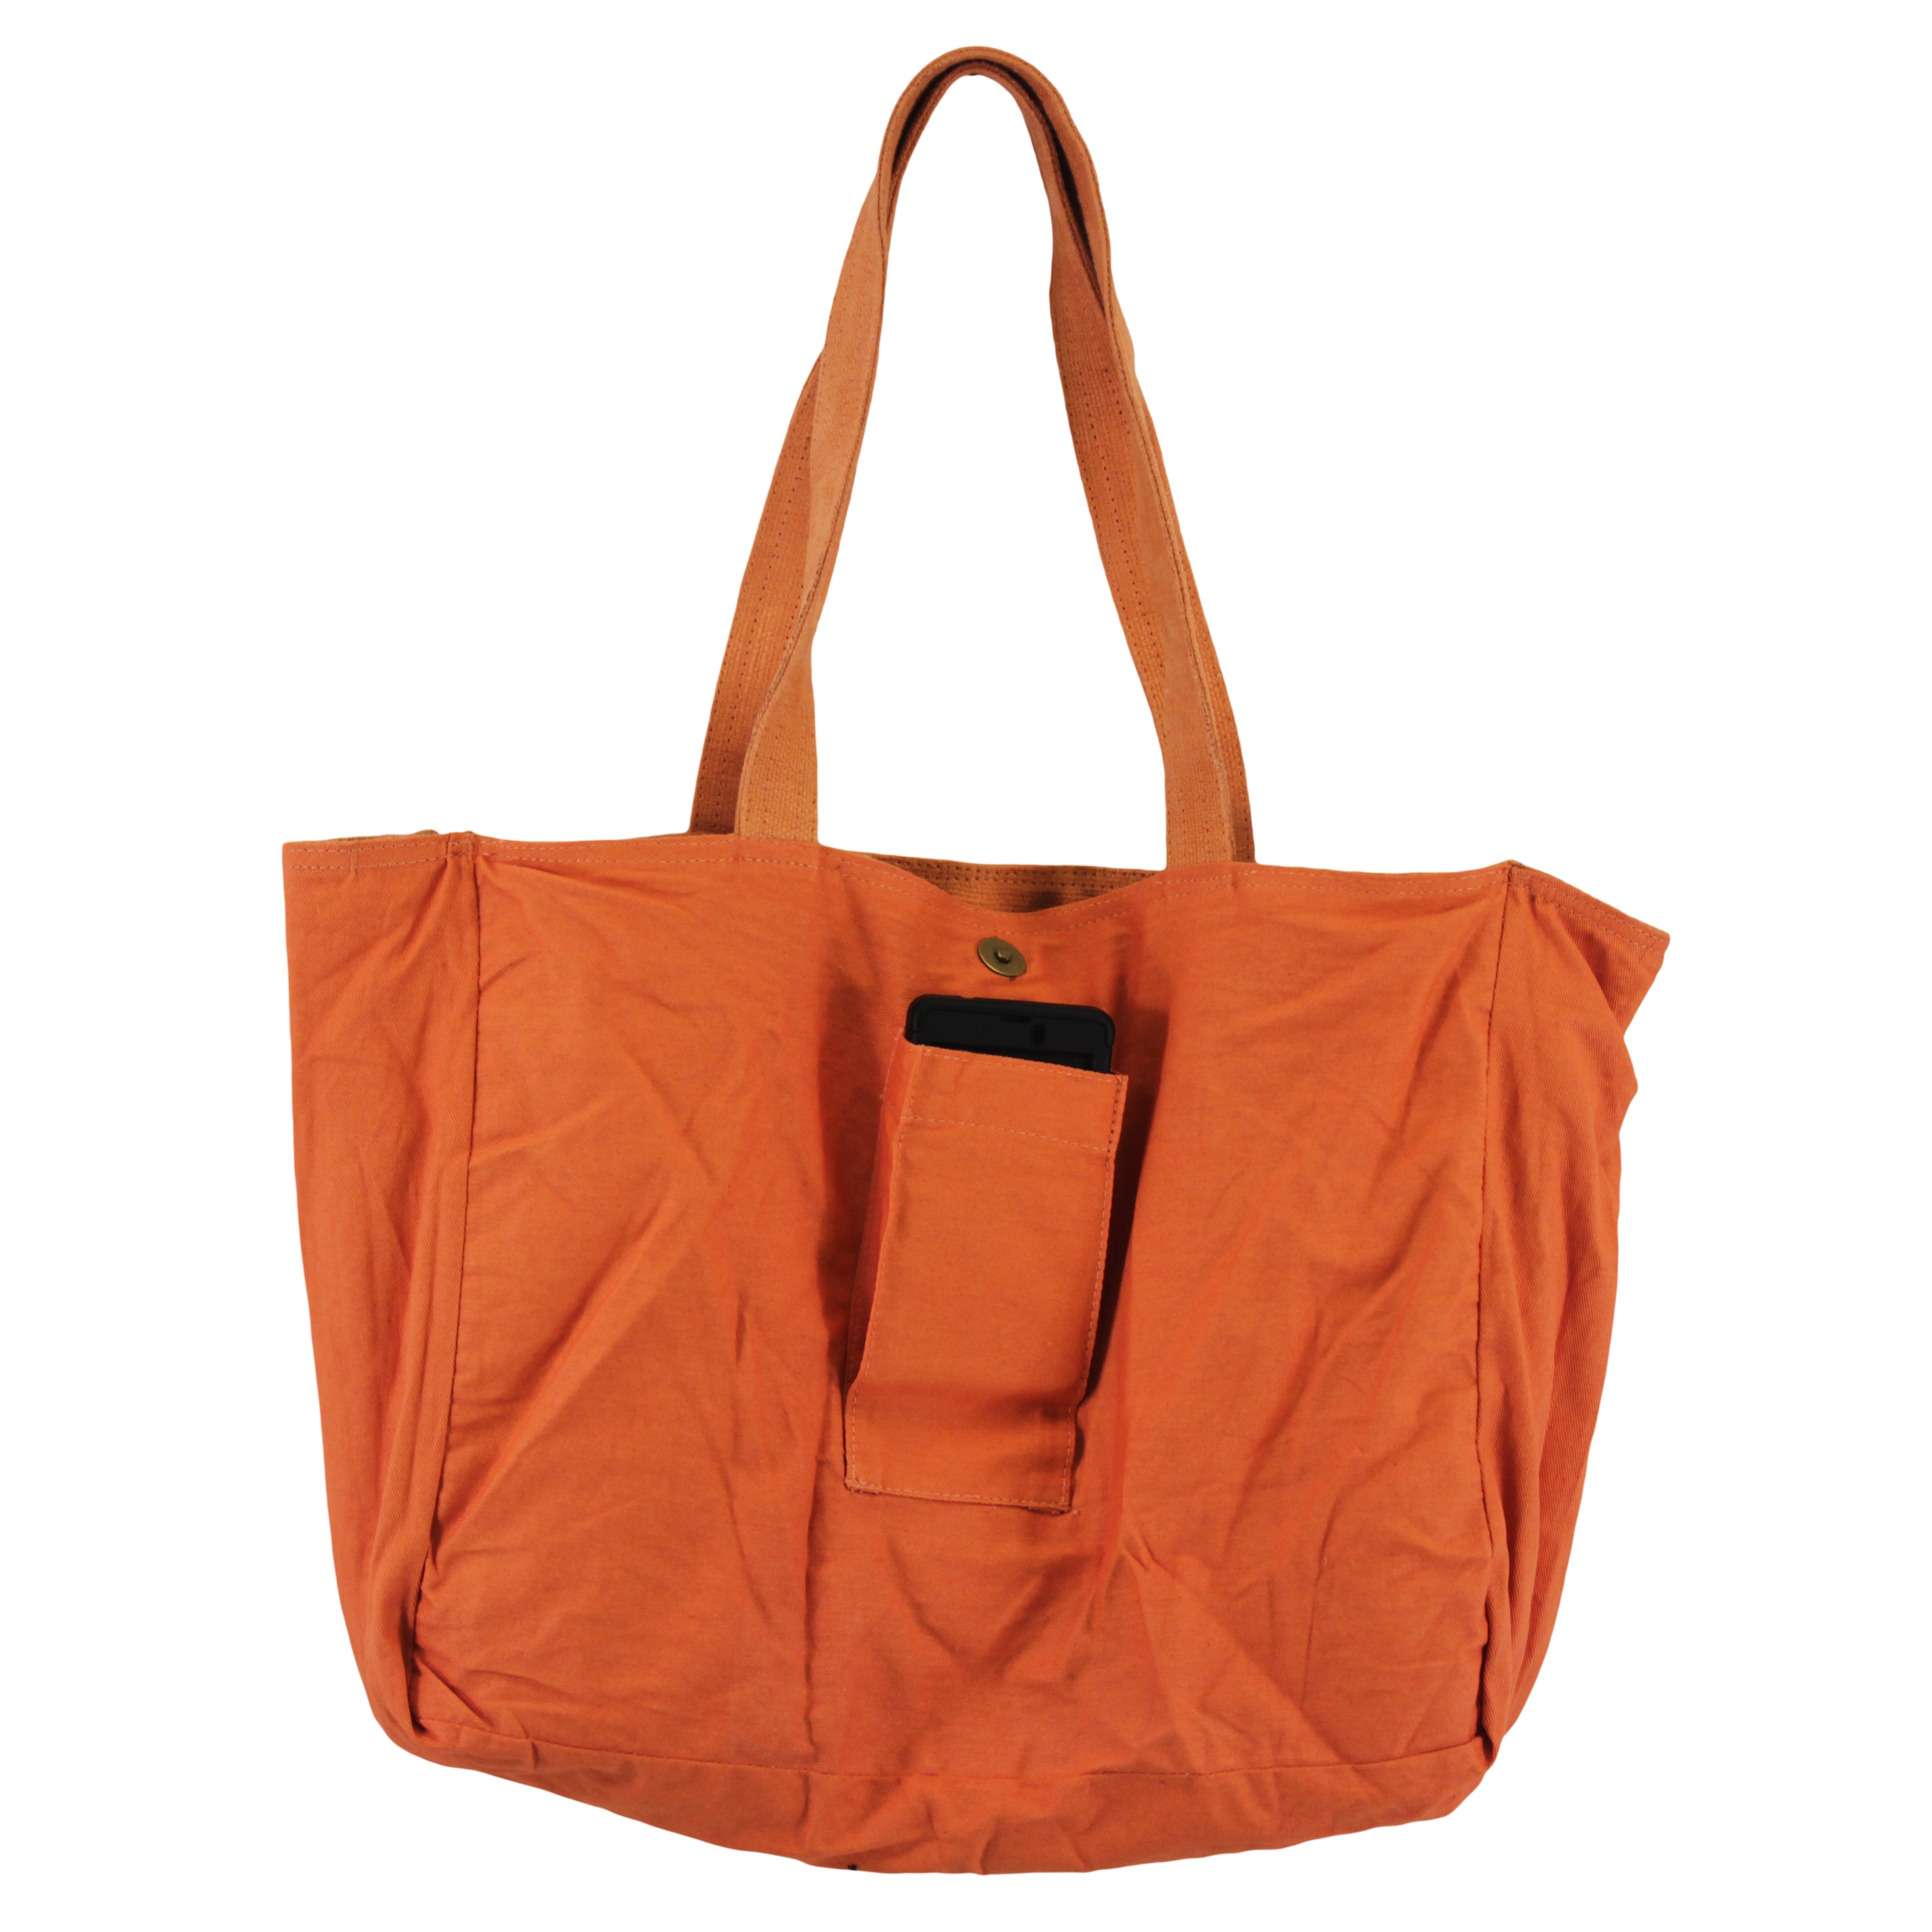 Maks | Jute-Cotton Tote Bag With Side Pockets | Grocery | Accessories ...